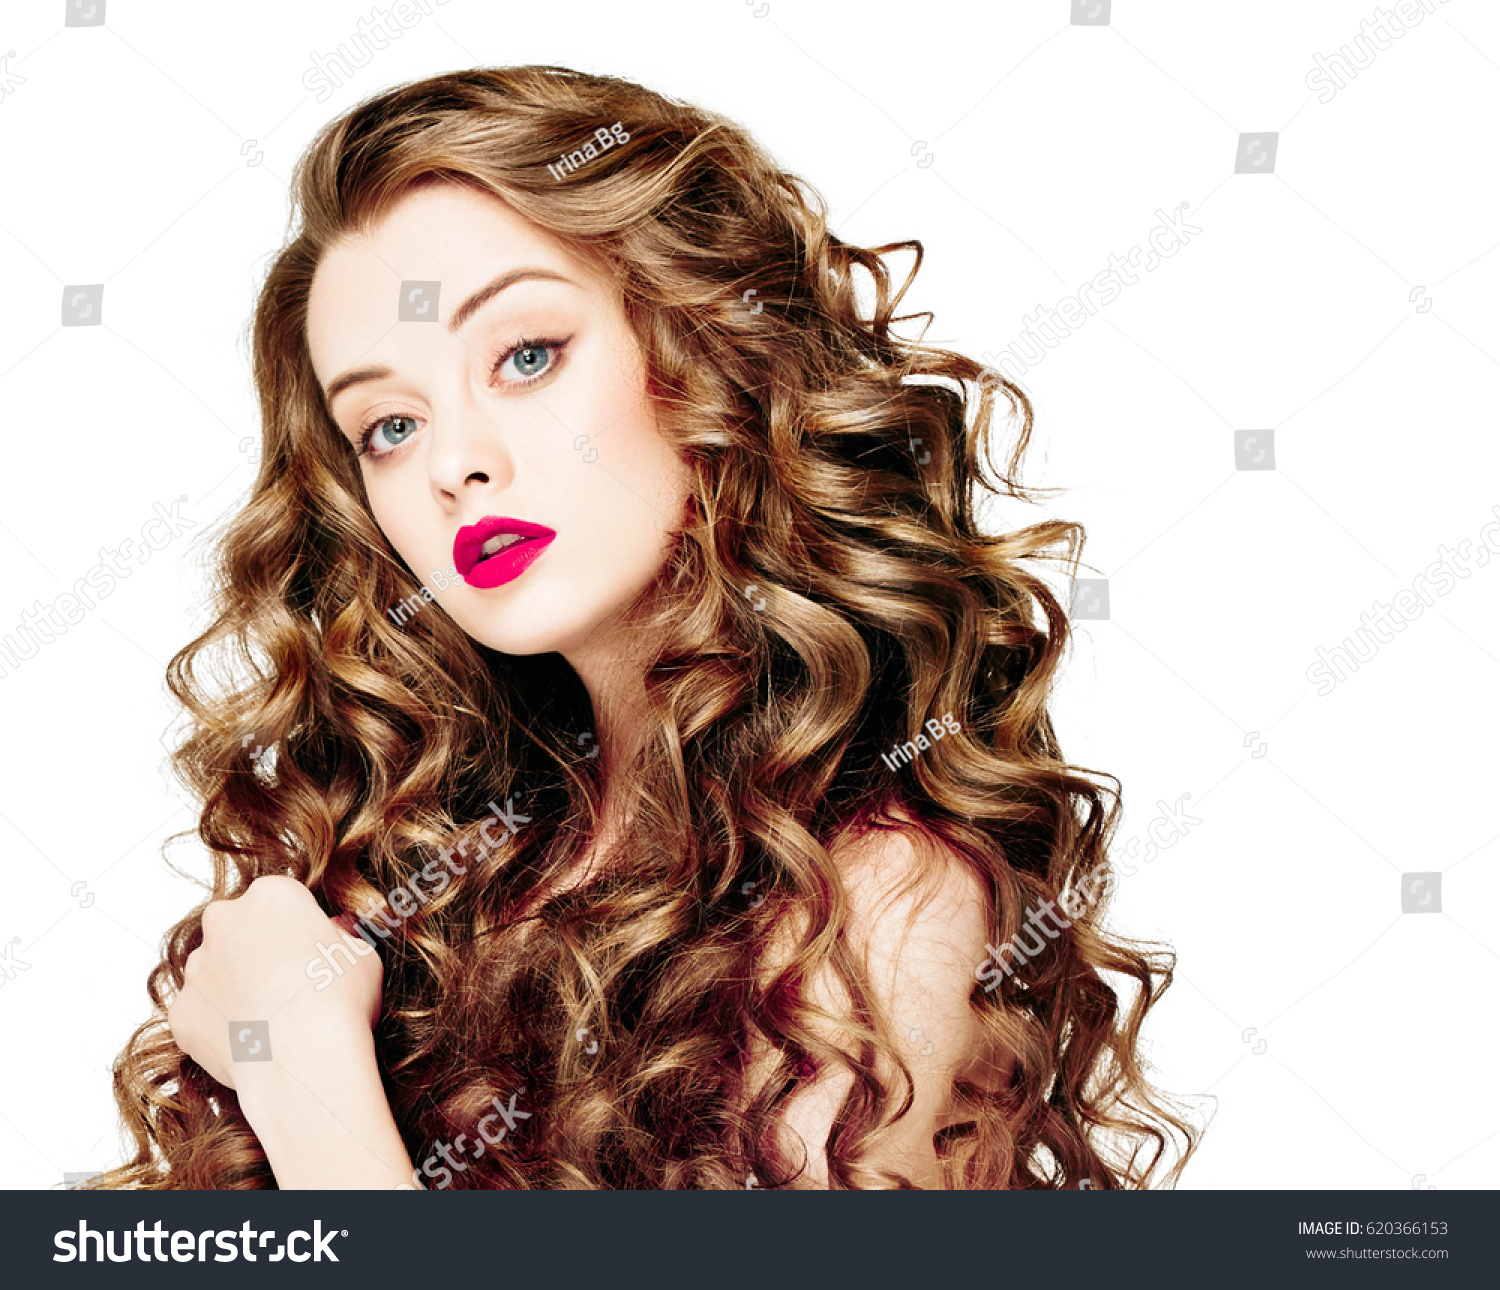 Beautiful People Curly Hair Red Lipsq Stock Photo Edit Now 620366153